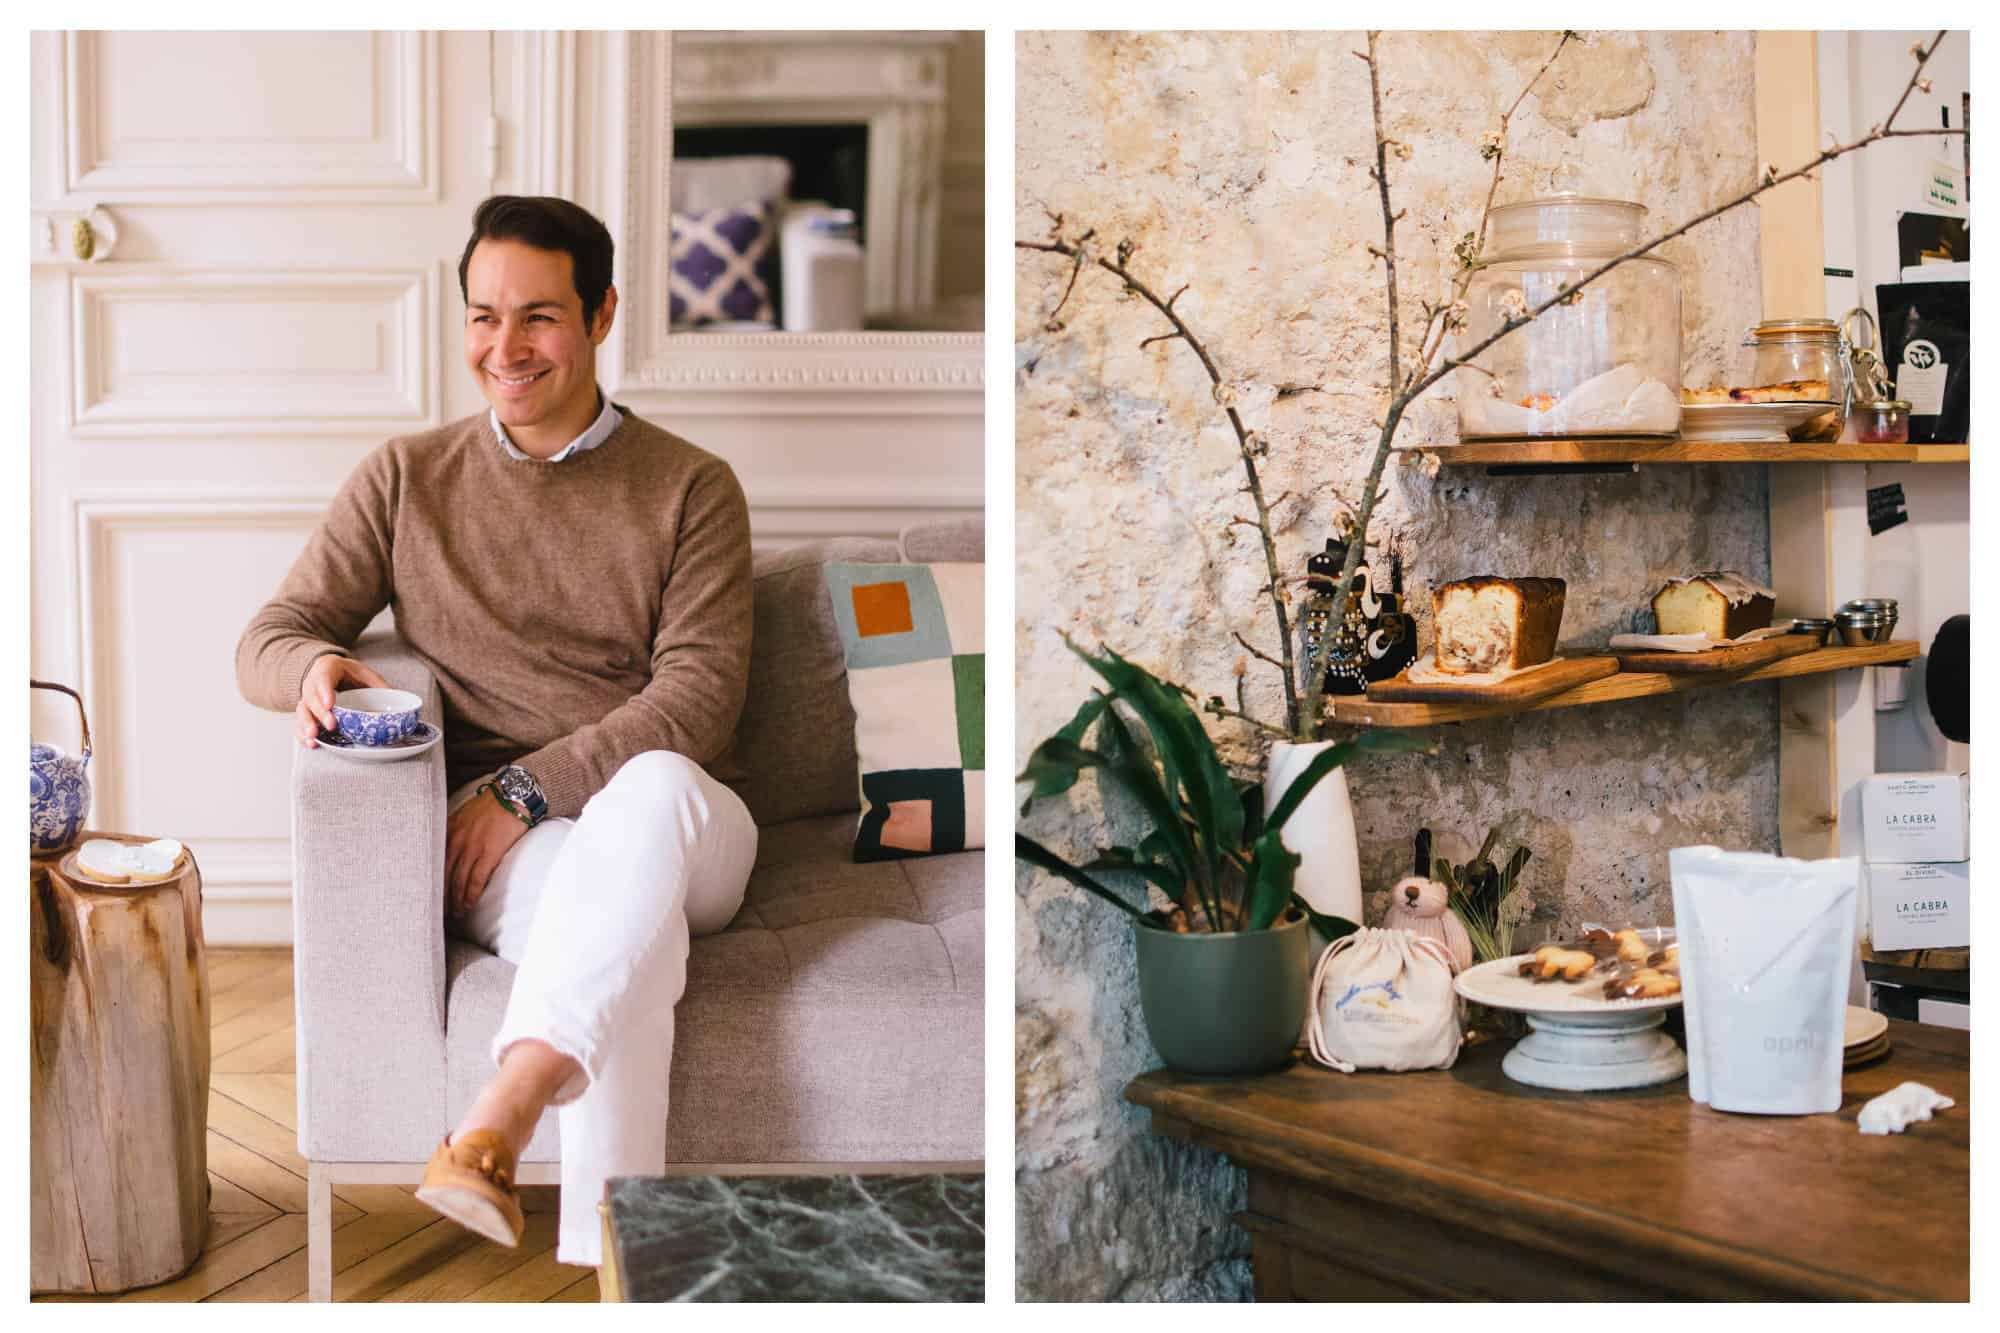 Frank sitting on his couch with a cup of tea (left). The counter at one of Frank's favorite Paris cafés full of cakes and teas (right).